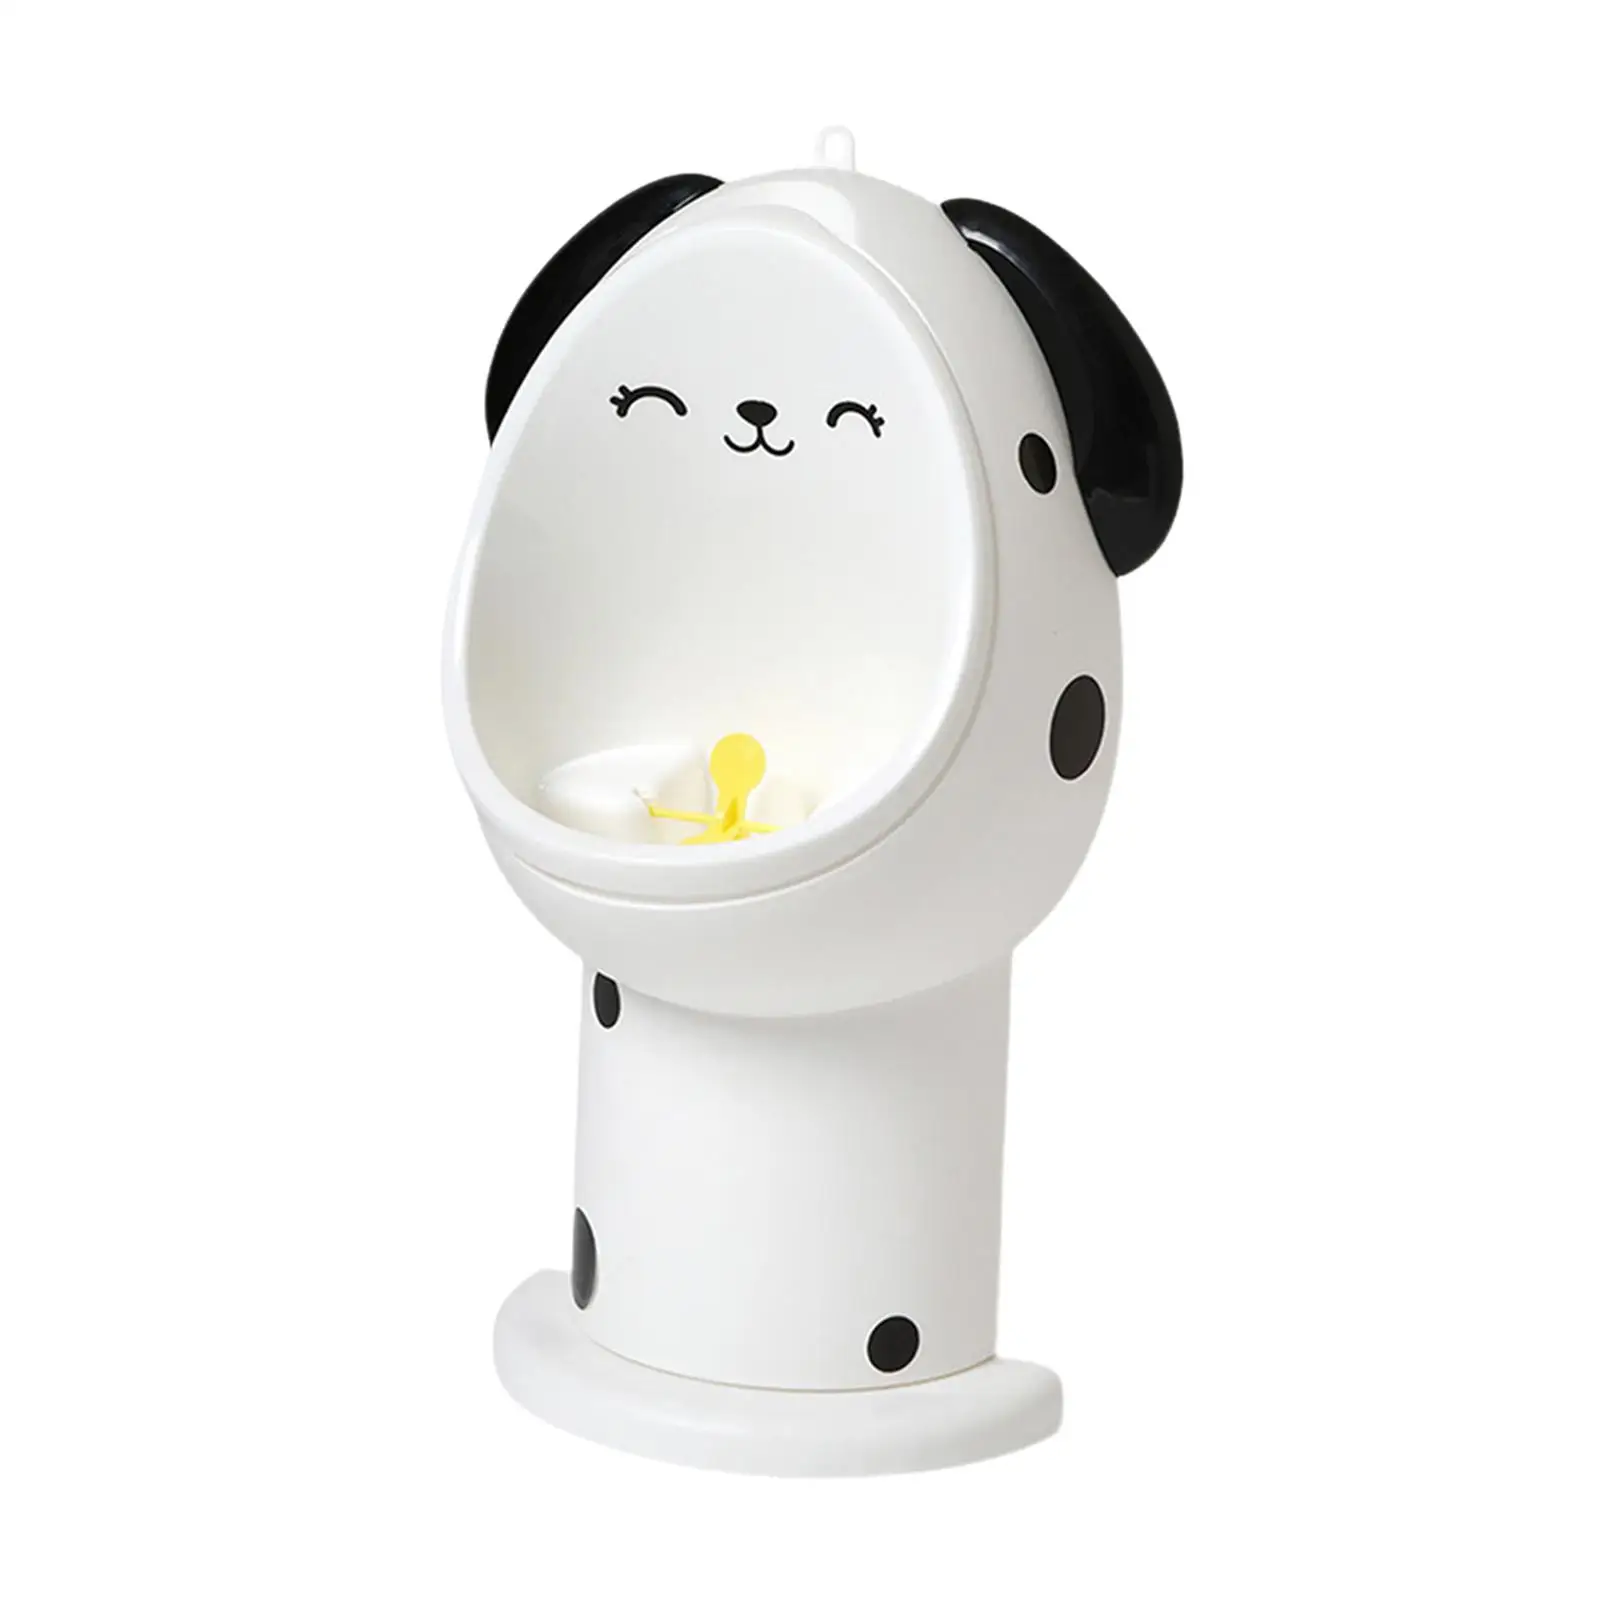 Toddler Pee Trainer Potty Urinal Toilet Boy Standing Urinal Built in Rotating Windmill for Bathroom Split Designed Adorable